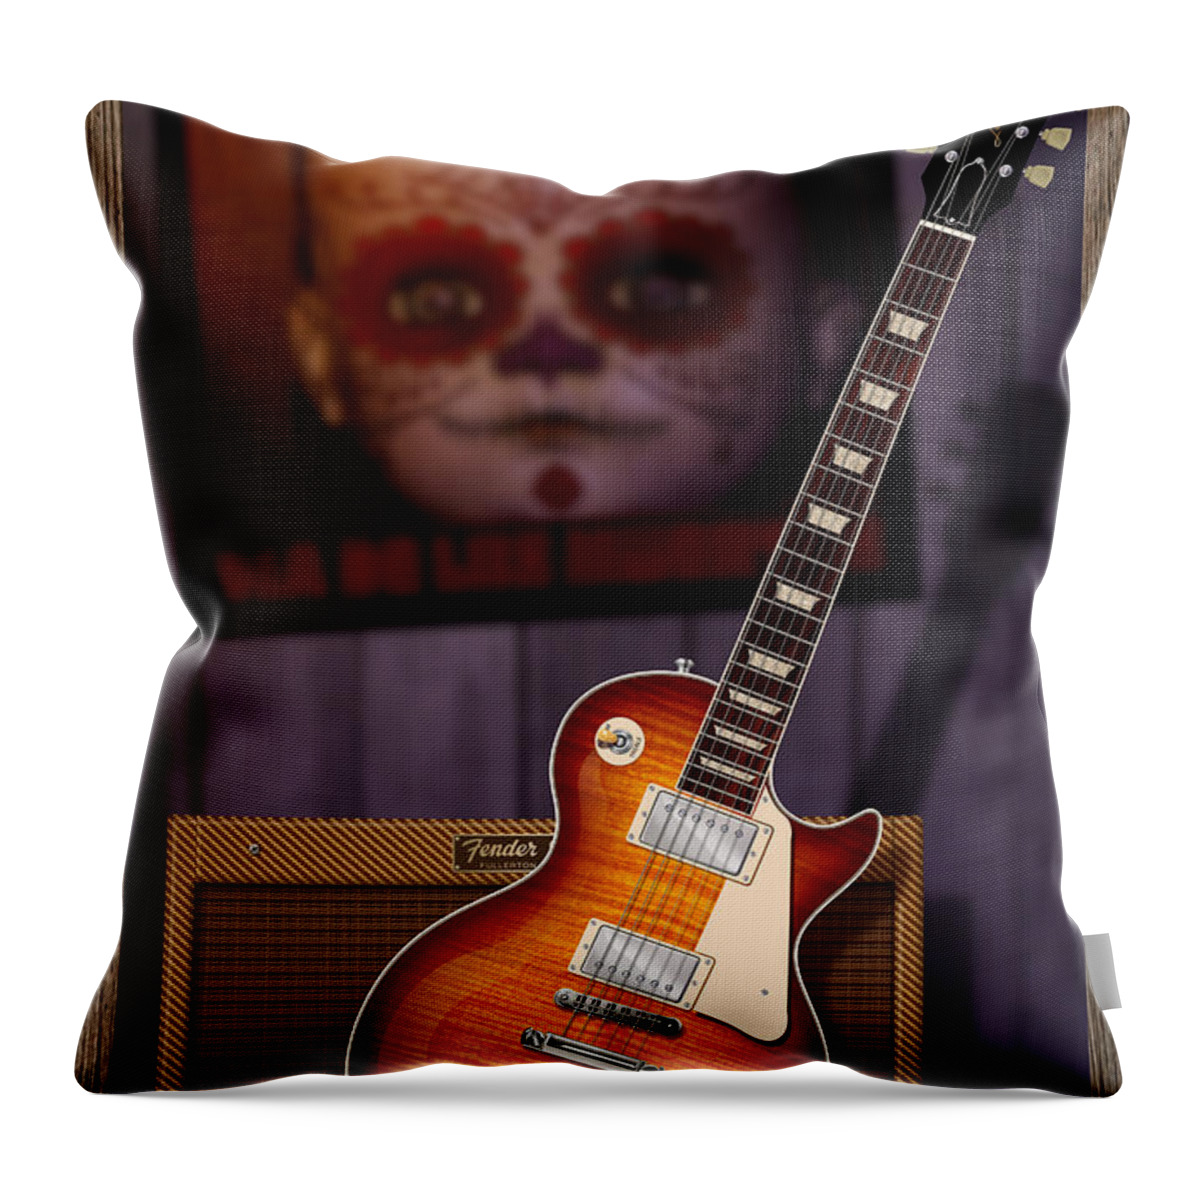 Gibson Les Paul Throw Pillow featuring the digital art Guitar Scene by WB Johnston